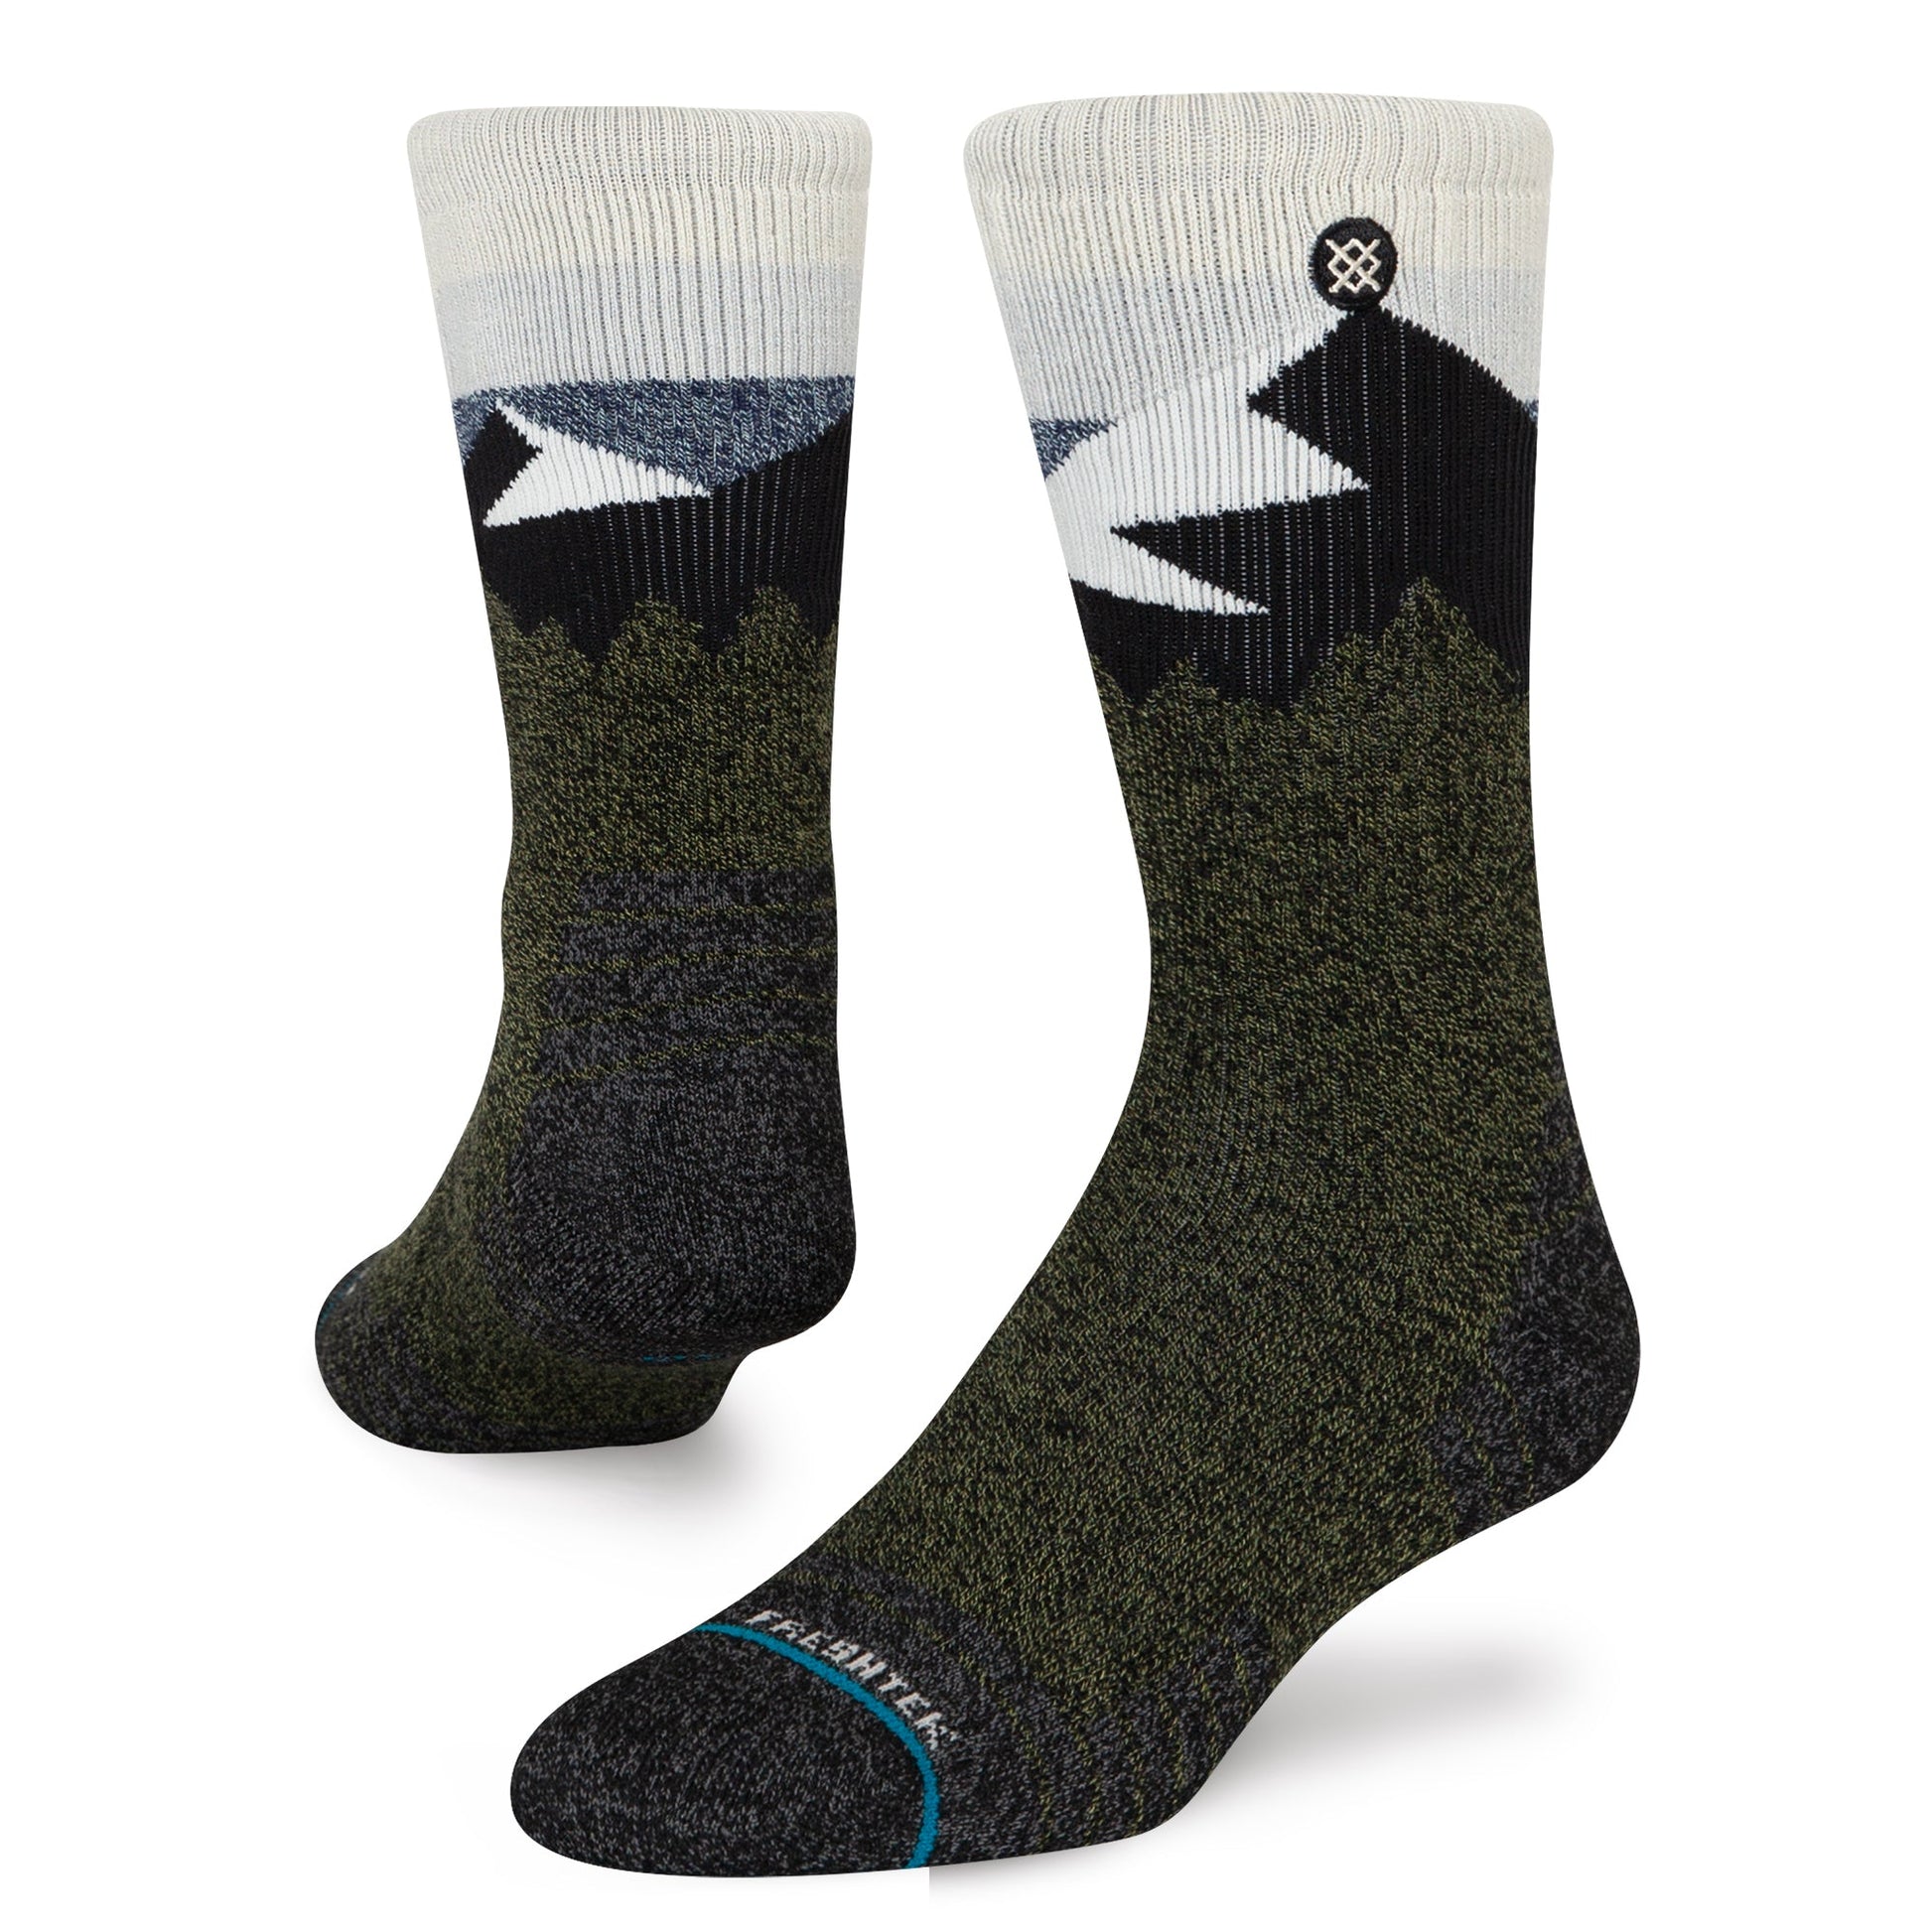 Stance Divided Crew Sock Blue – Stance Europe